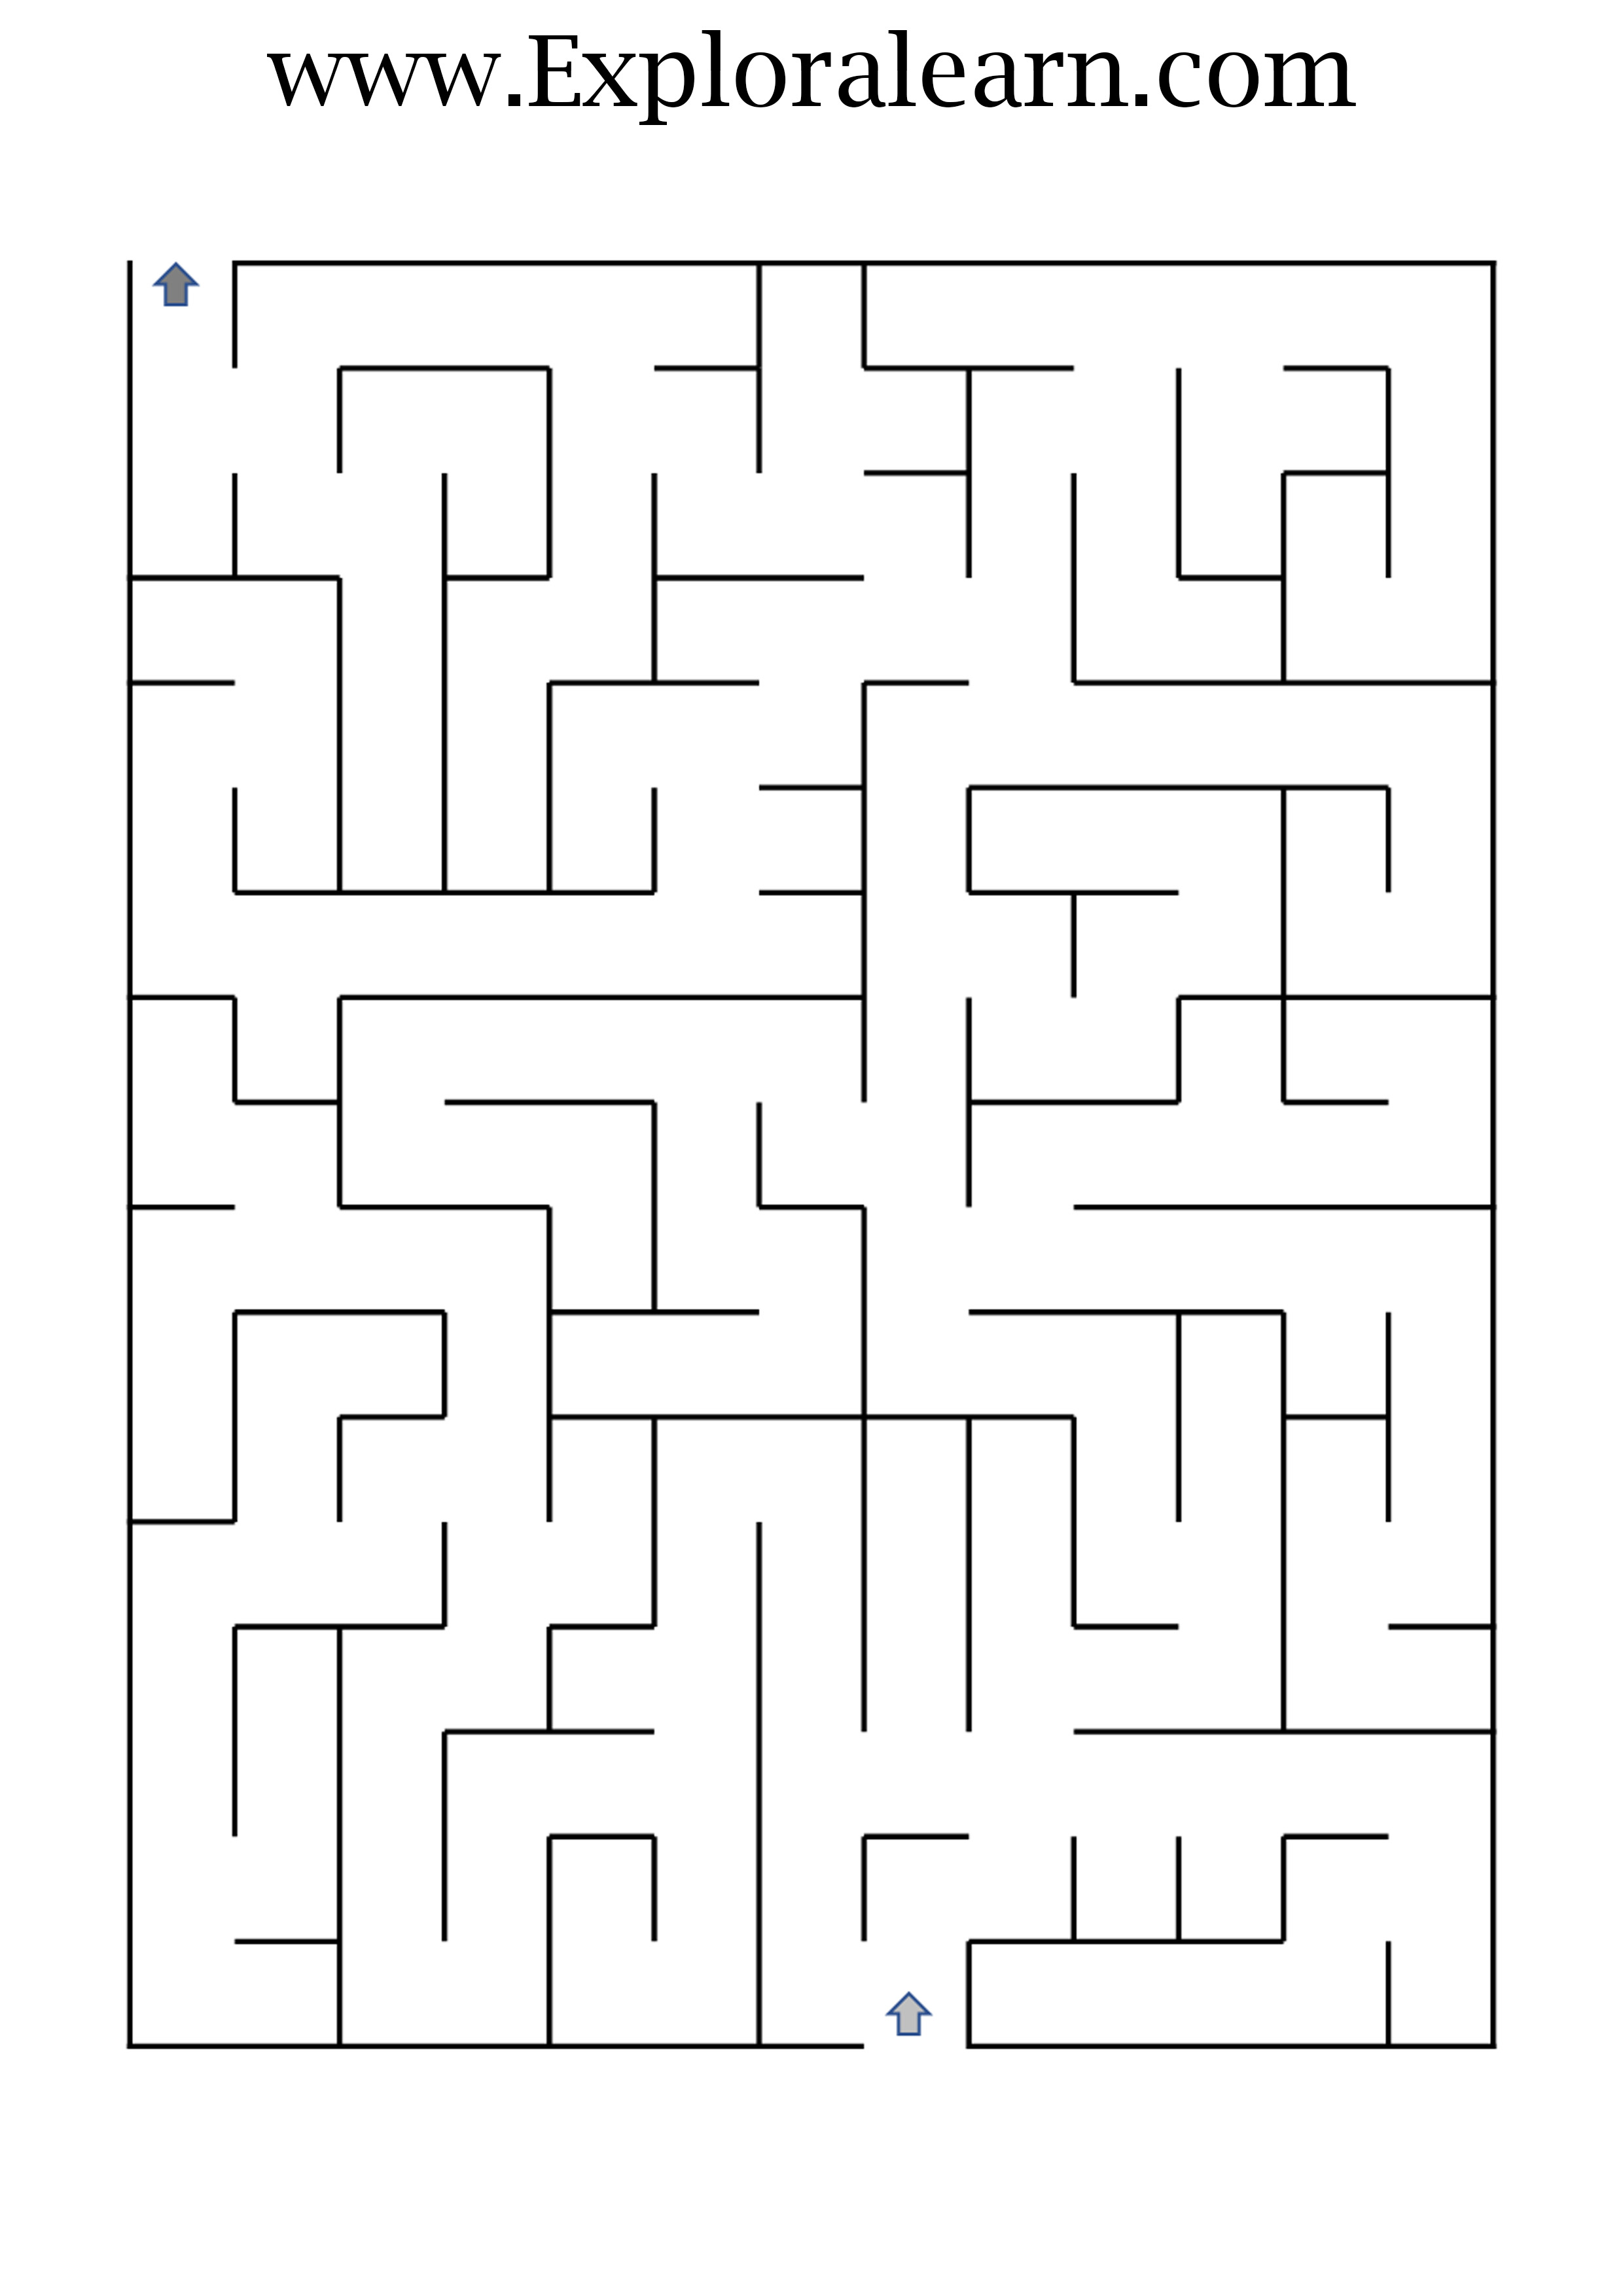 Maze Explorations For Kids (ages 2-12): Navigate Fun Challenges With 